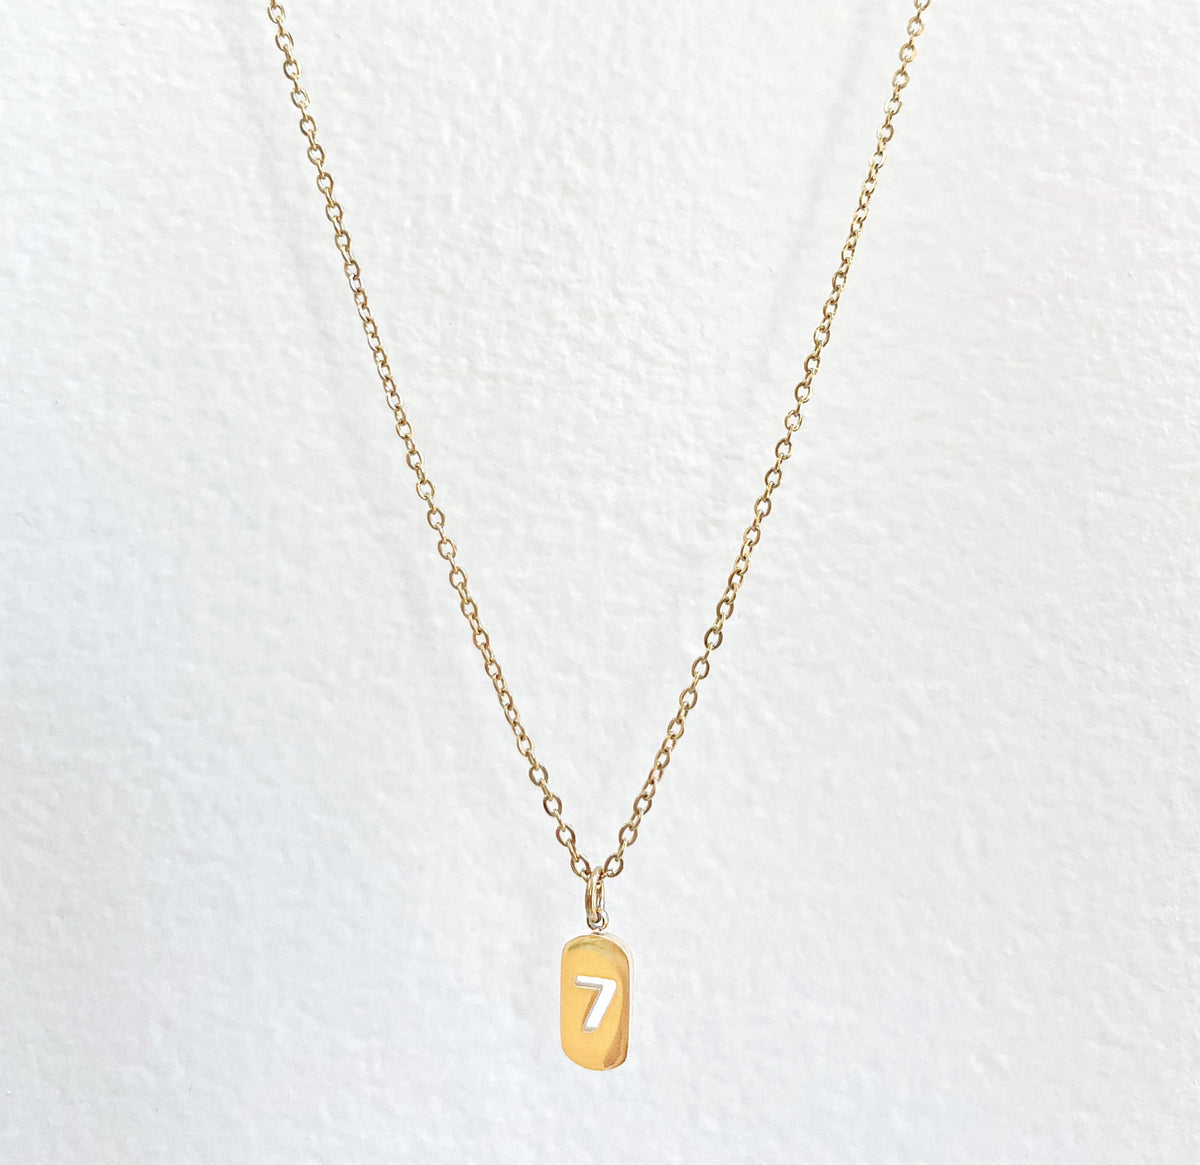 18K GOLD LUCKY 7 PENDANT NECKLACE - SAMPLE